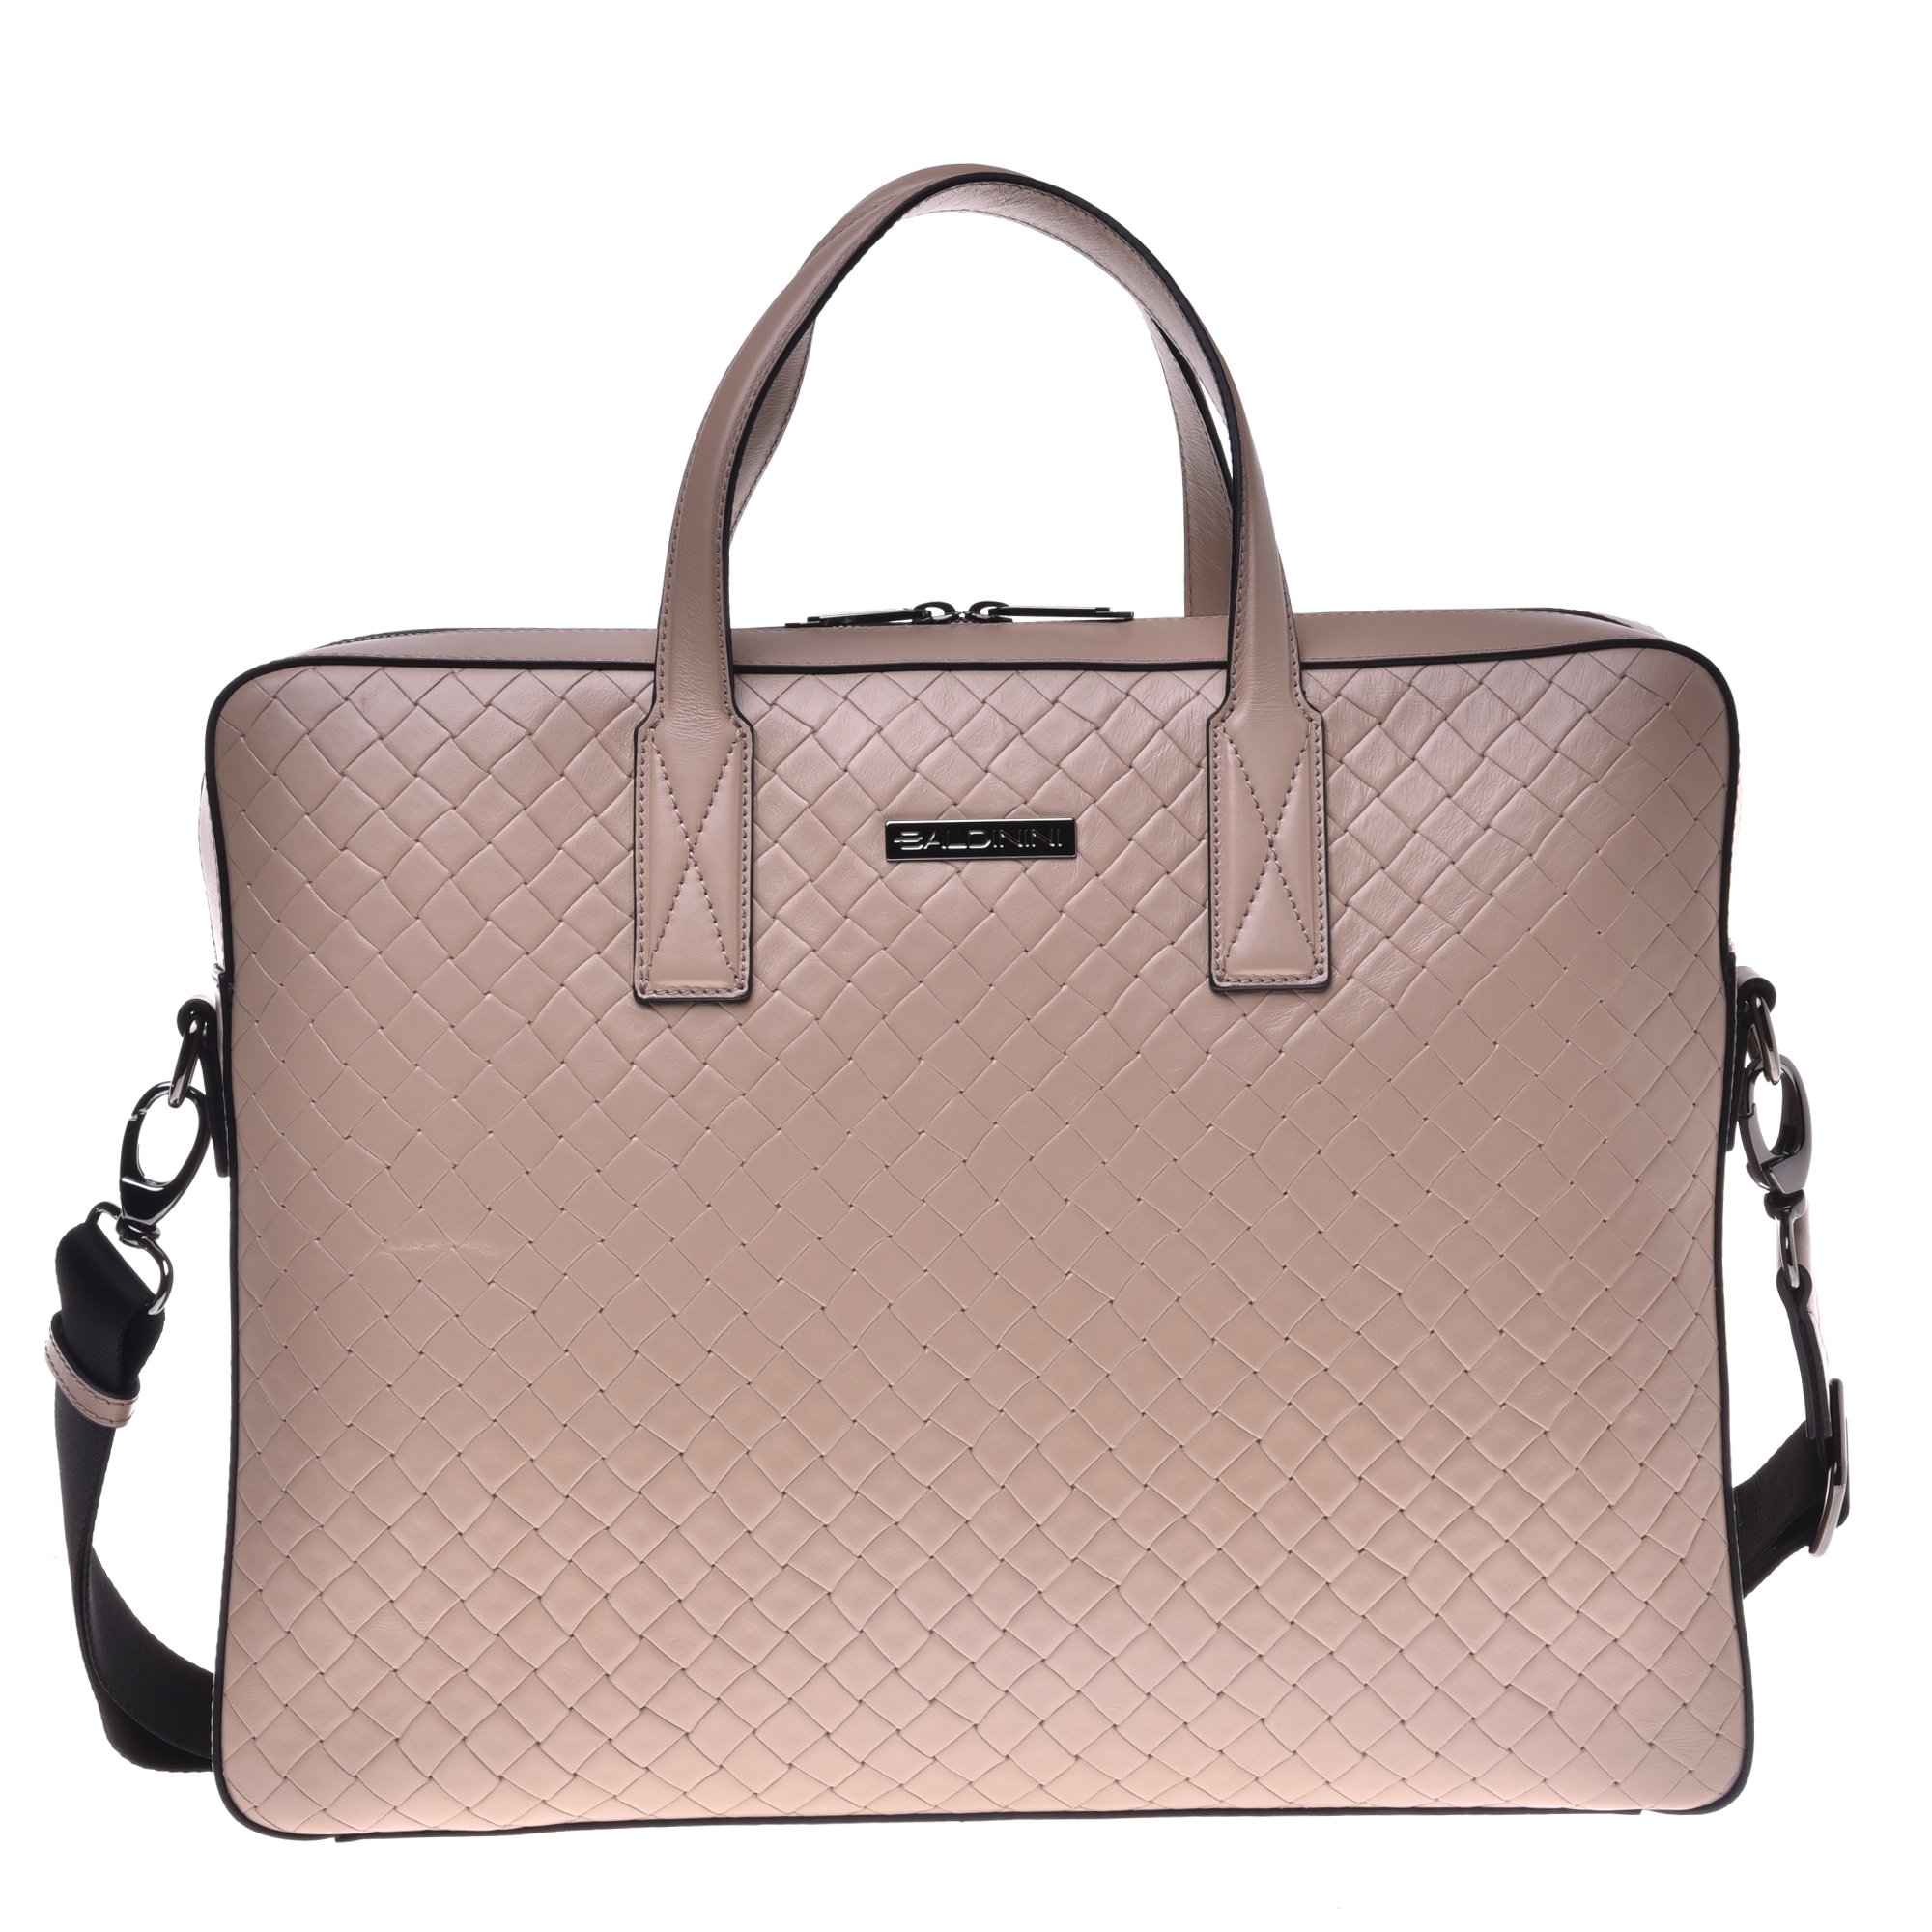 Beige woven-print leather work bag image